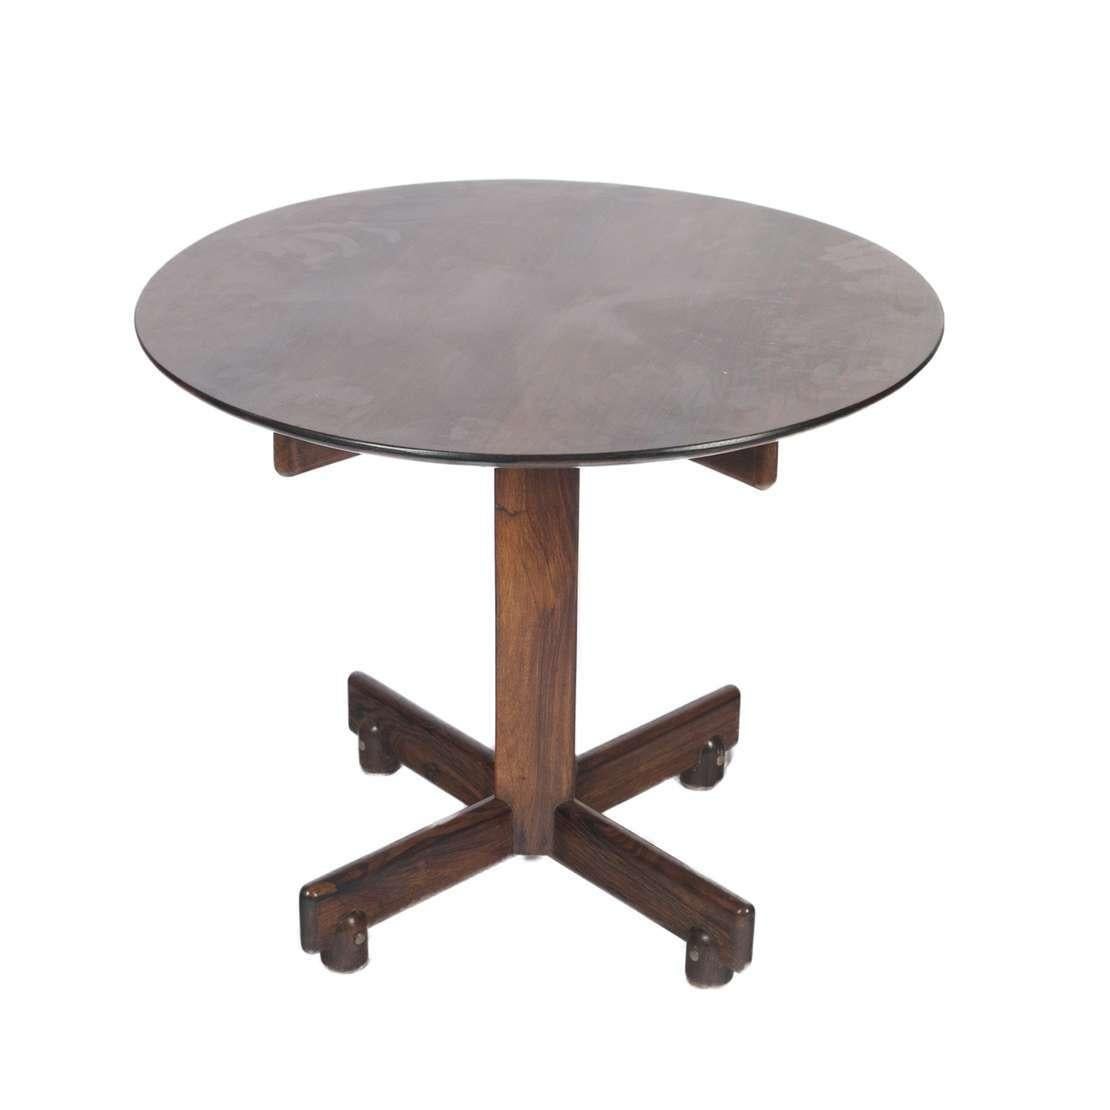 Designed in 1960 by Sergio Rodrigues, this model table 